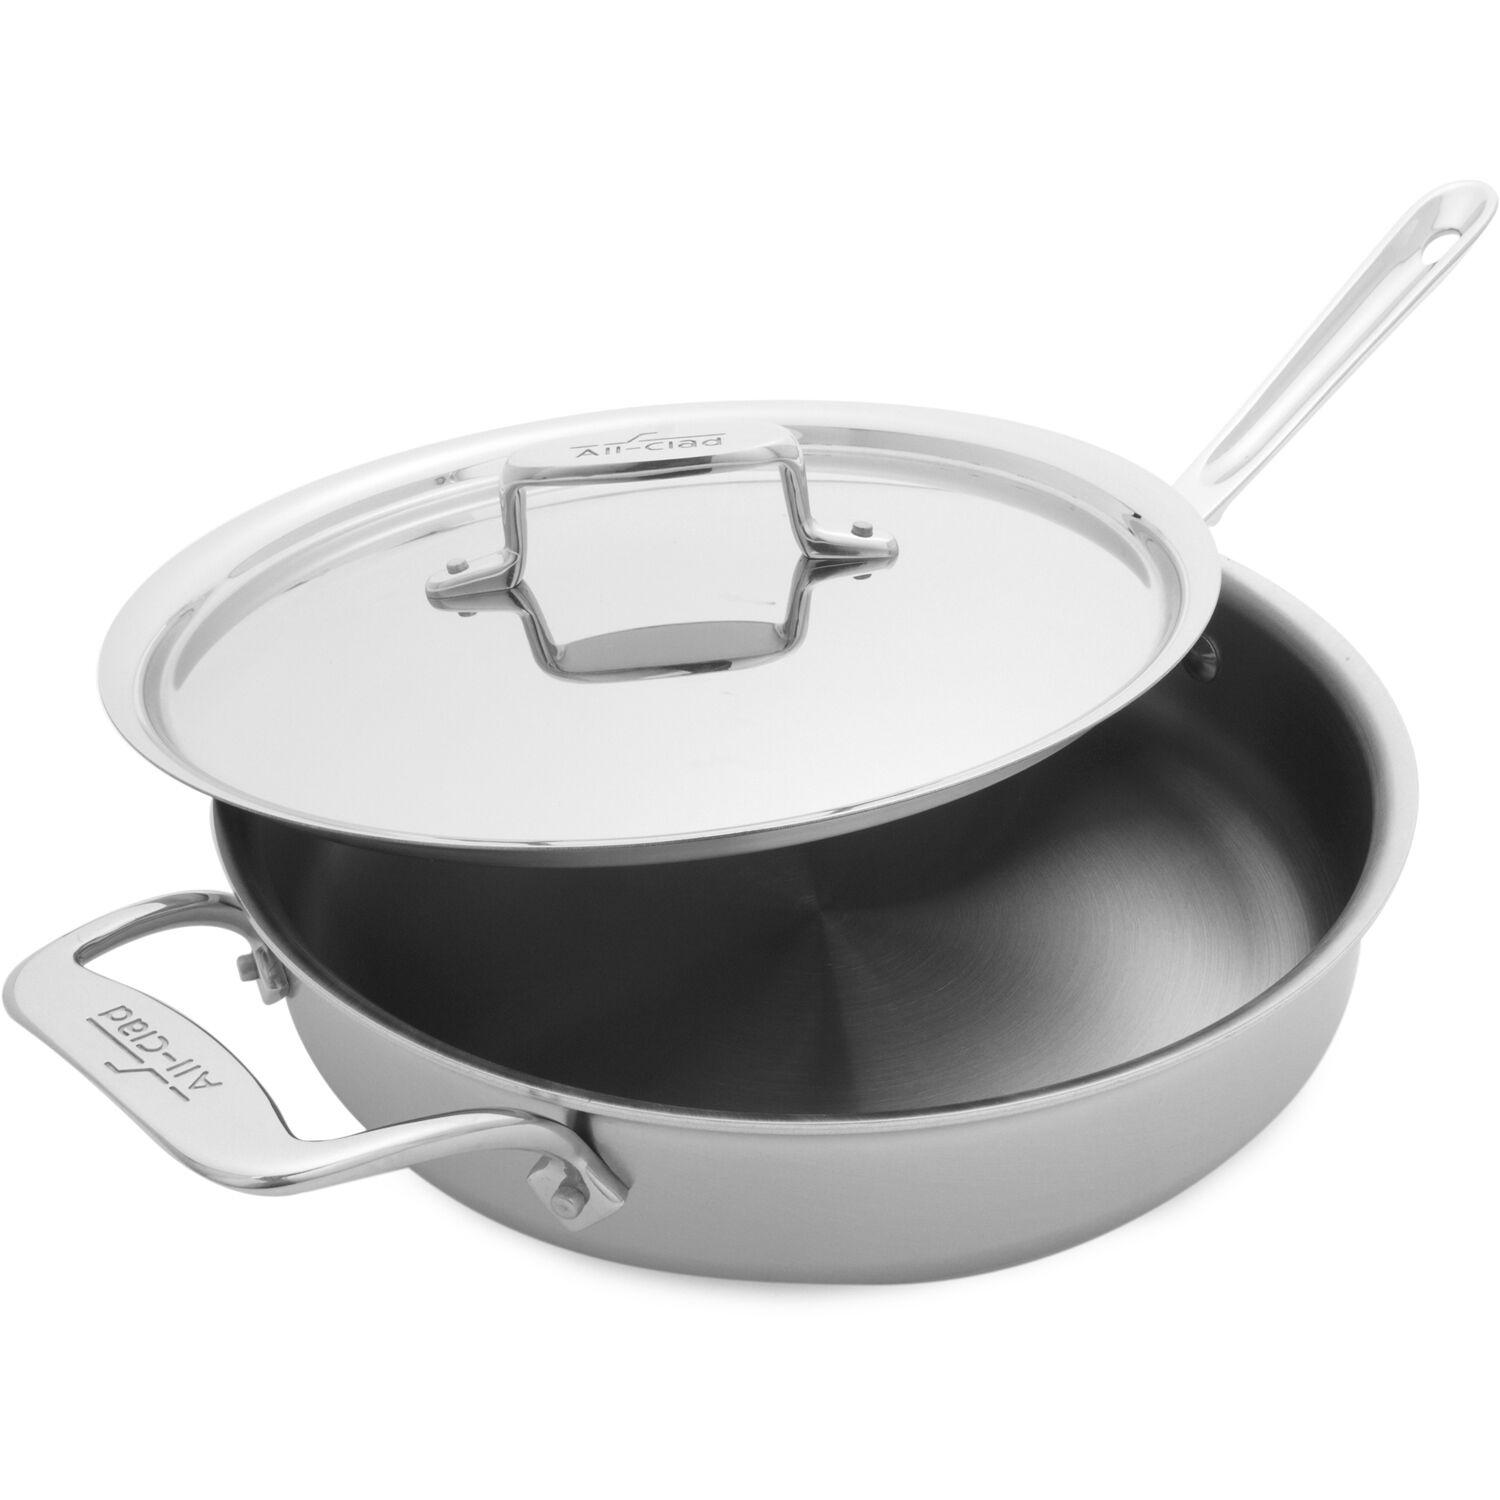 All-clad D5 Brushed Stainless Steel 4-Qt Covered Weeknight Saute Pan All Clad D5 Stainless Steel Sauté Pan